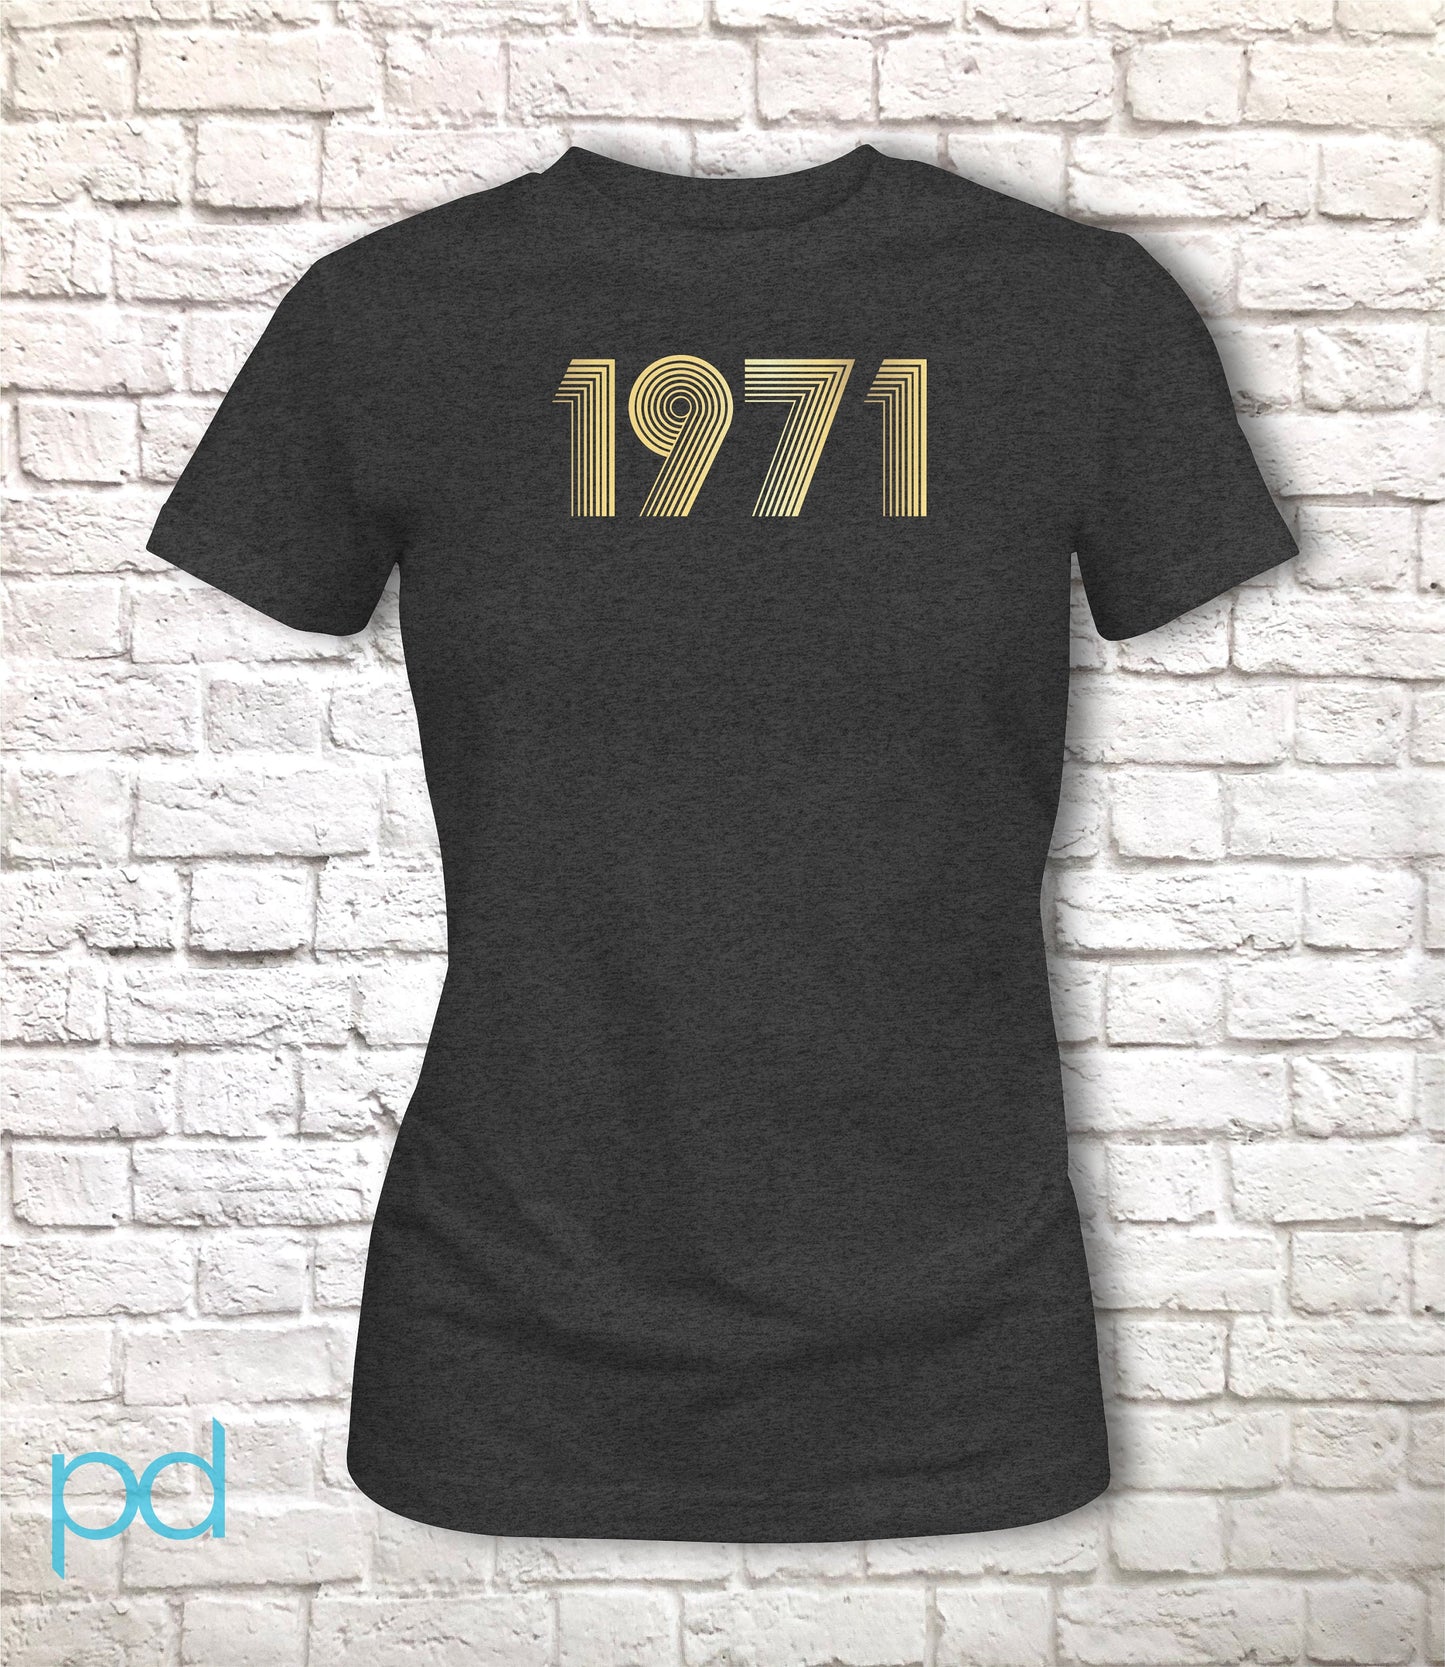 1971 Womens T Shirt Metallic Gold or Silver Foil, 51st Birthday Gift Fitted T Shirt in Retro & Vintage 70s style, Fiftieth Ladies Top